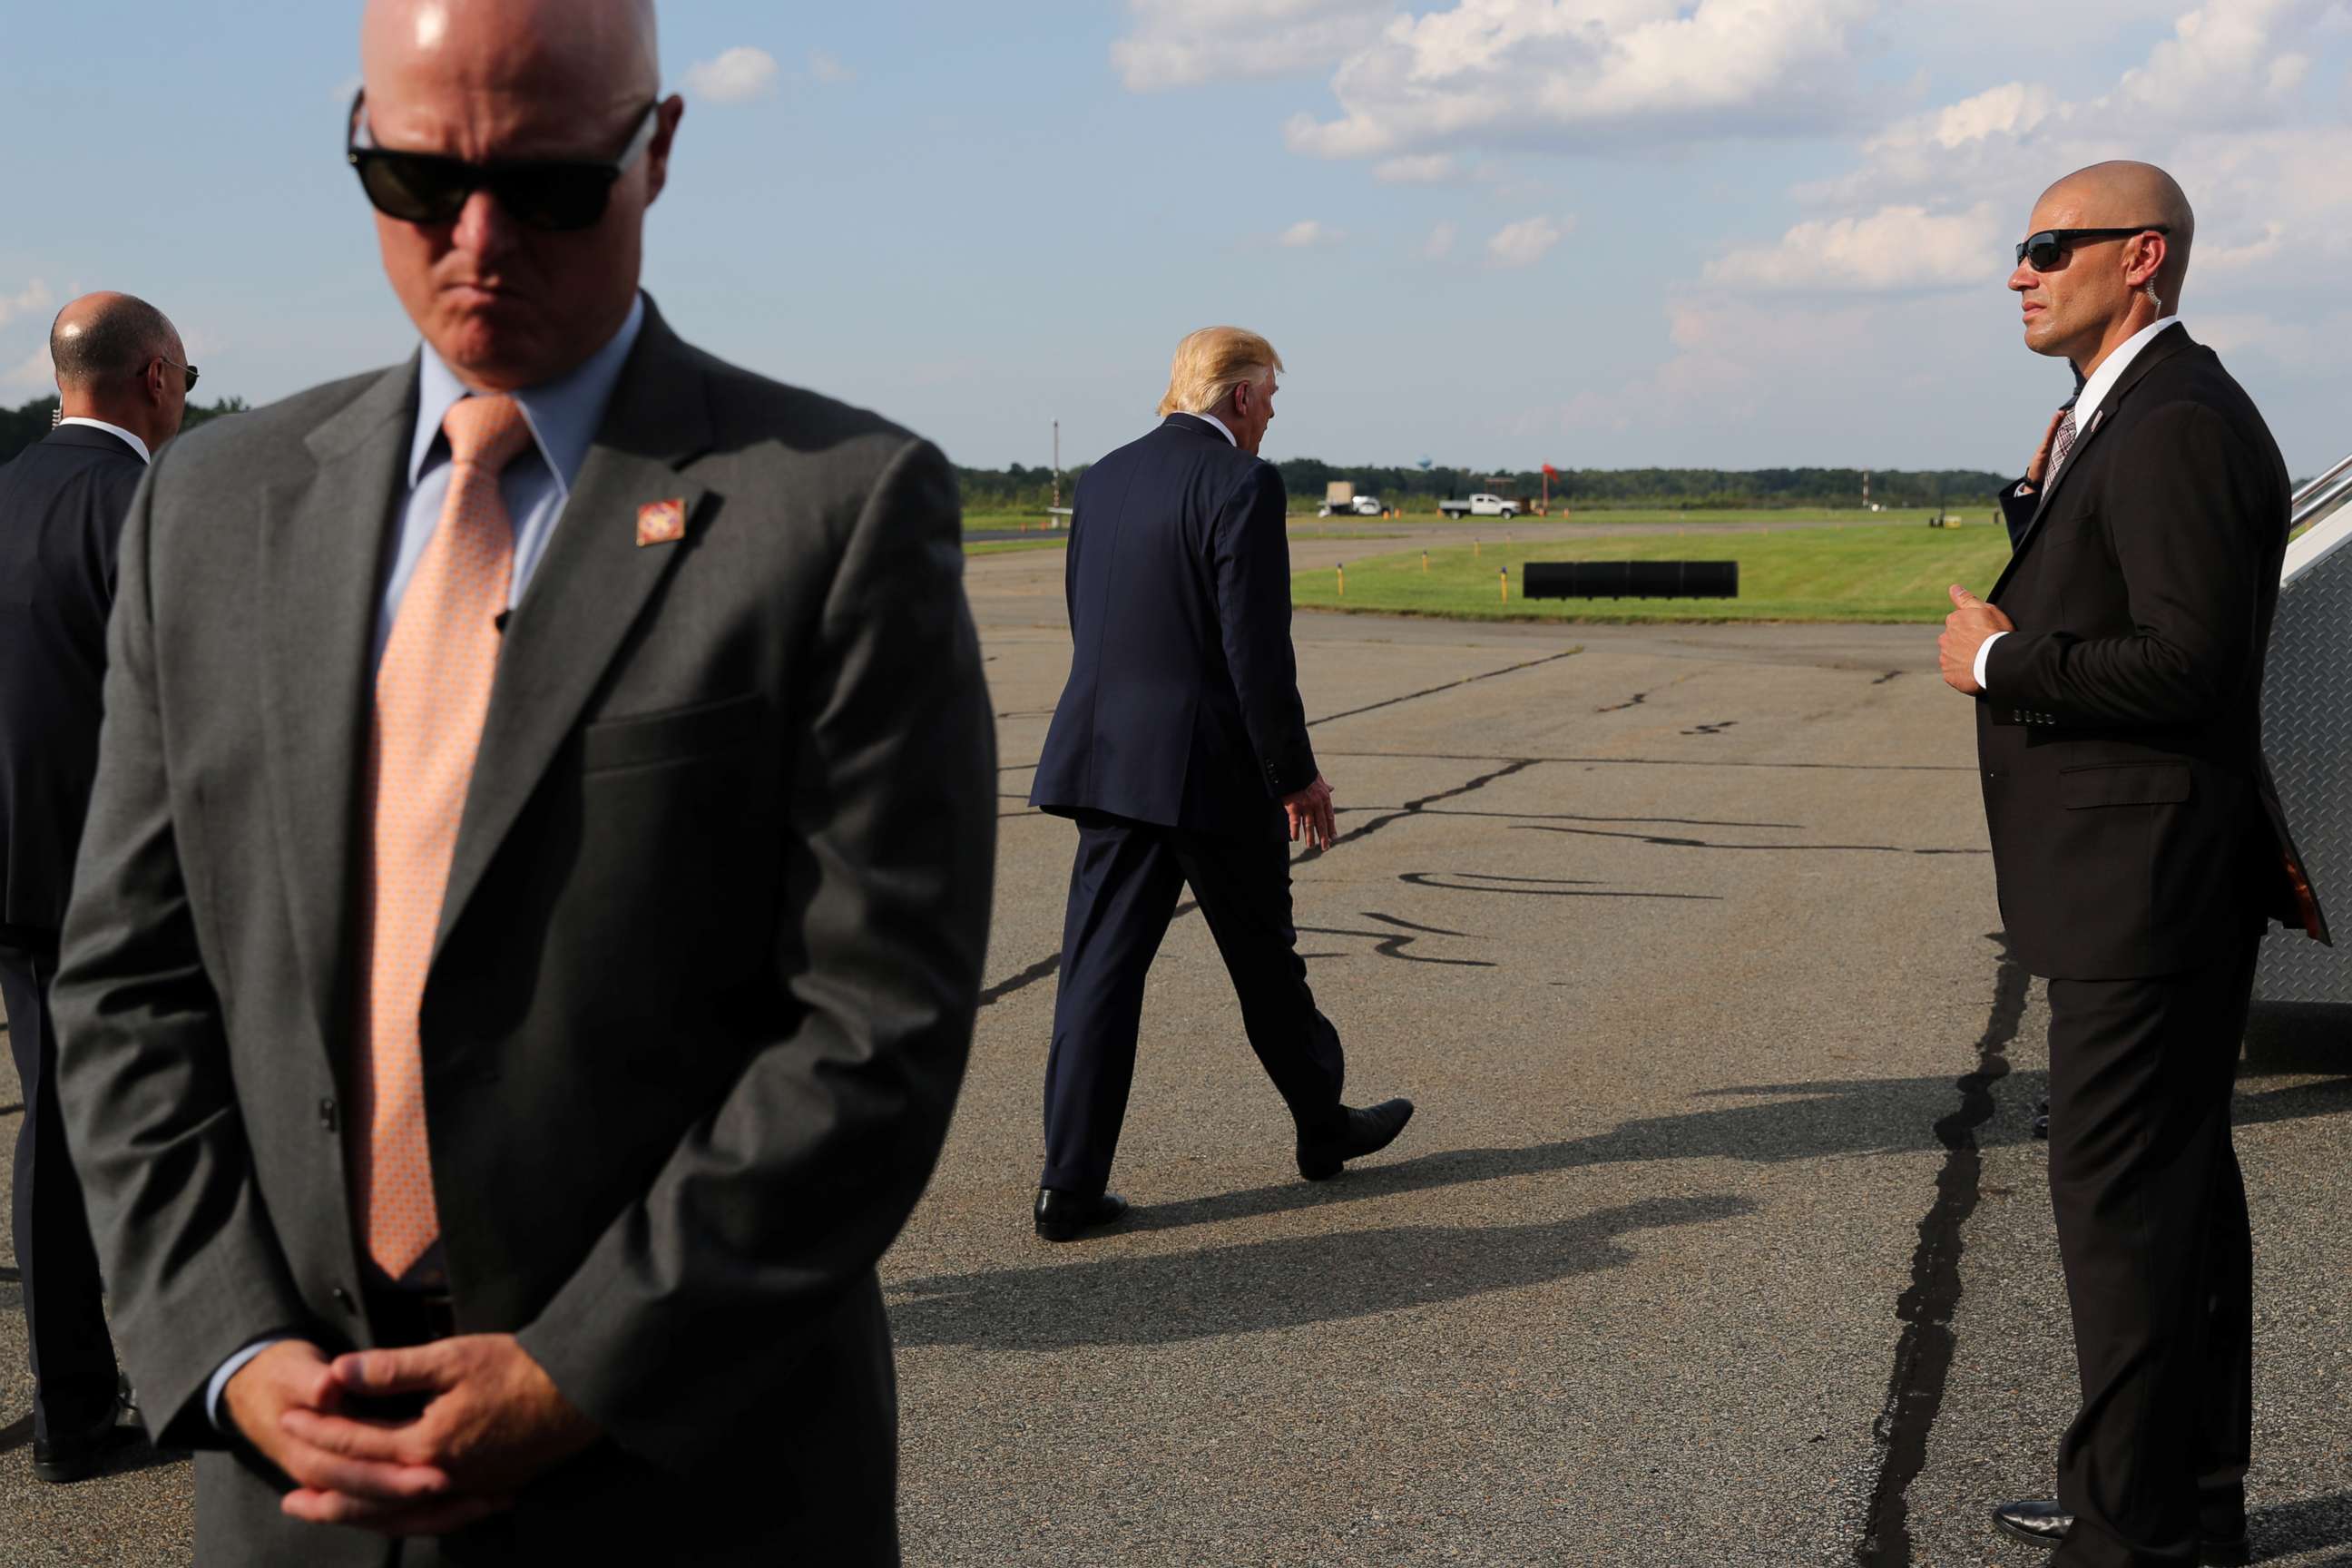 PHOTO: U.S. Secret Service agents guard President Donald Trump as he boards Air Force One to return to Washington from Morristown Municipal Airport in Morristown, New Jersey, Aug. 18, 2019.